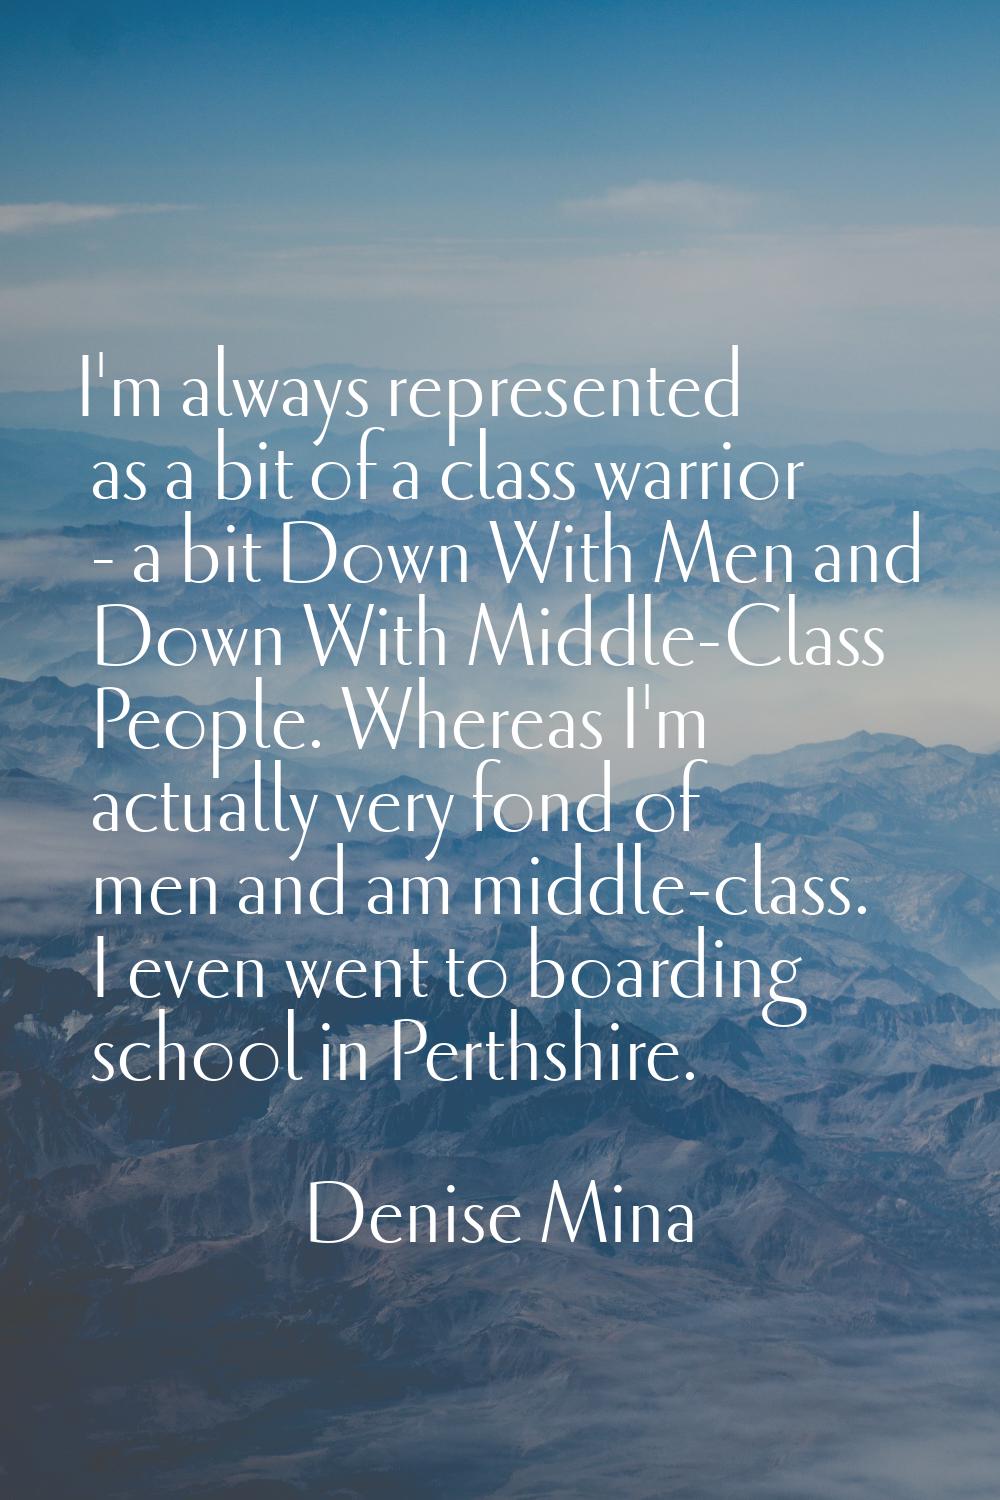 I'm always represented as a bit of a class warrior - a bit Down With Men and Down With Middle-Class